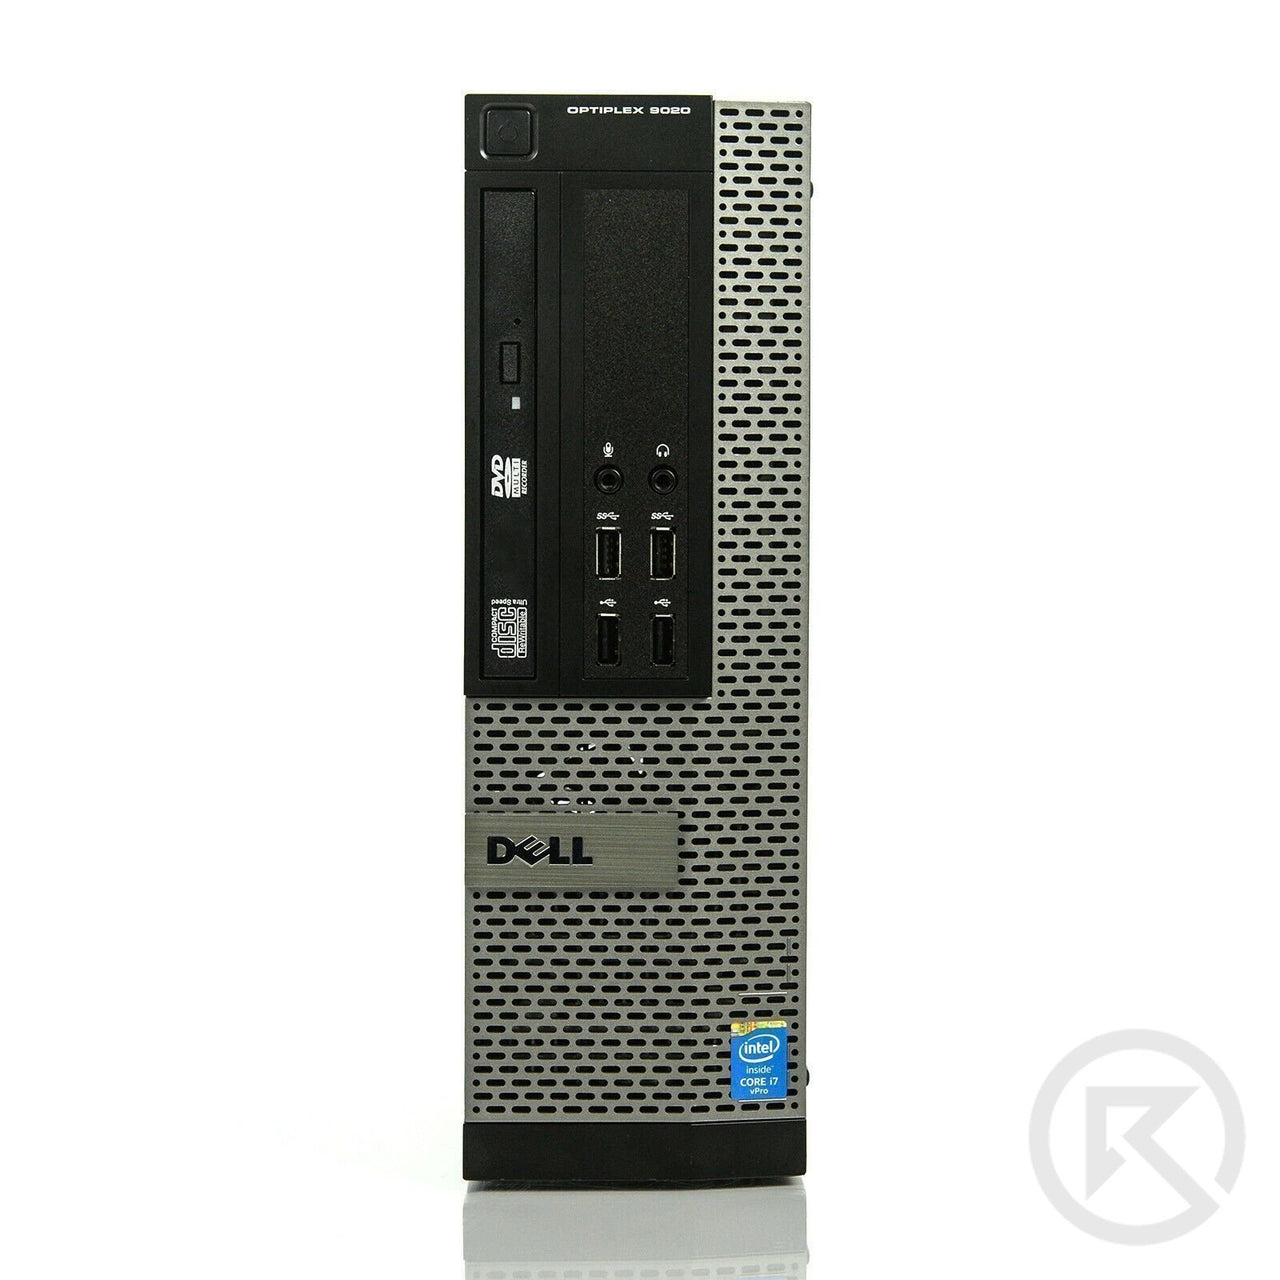 Dell Optiplex 9020 Intel Core I5 4th Generation Small Form Factor-Computer-RefurbConnect-Refurbished-Computers-Laptops-Printers-New York